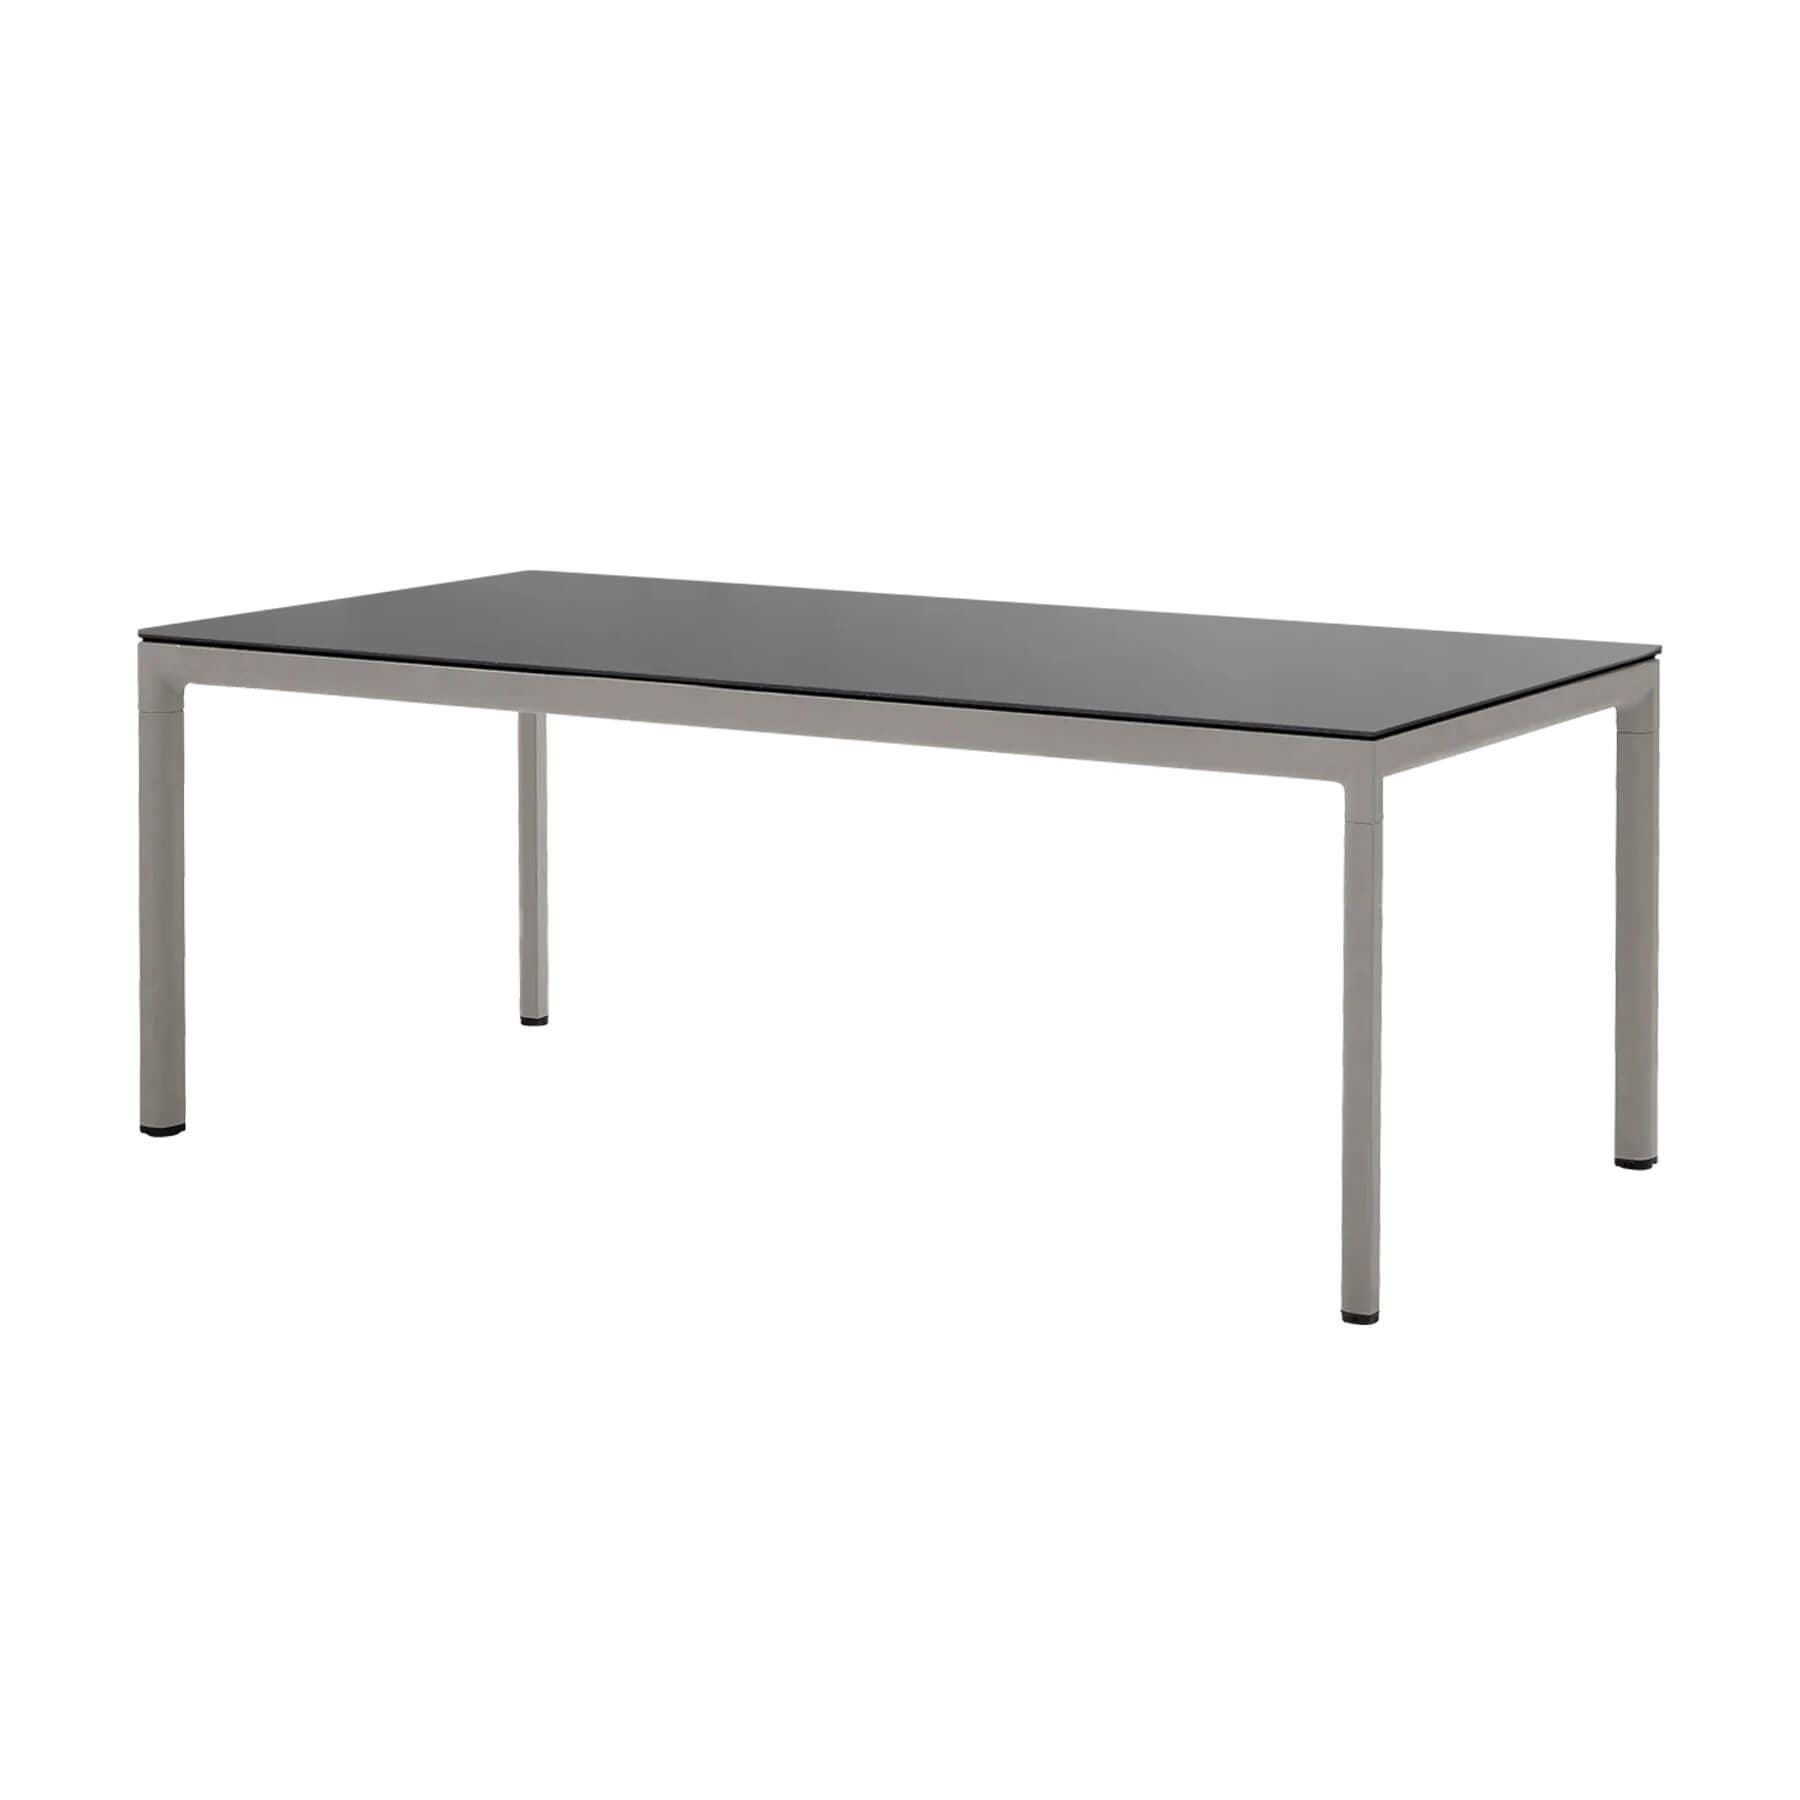 Caneline Drop Outdoor Dining Table Ceramic Nero Top Taupe Legs Grey